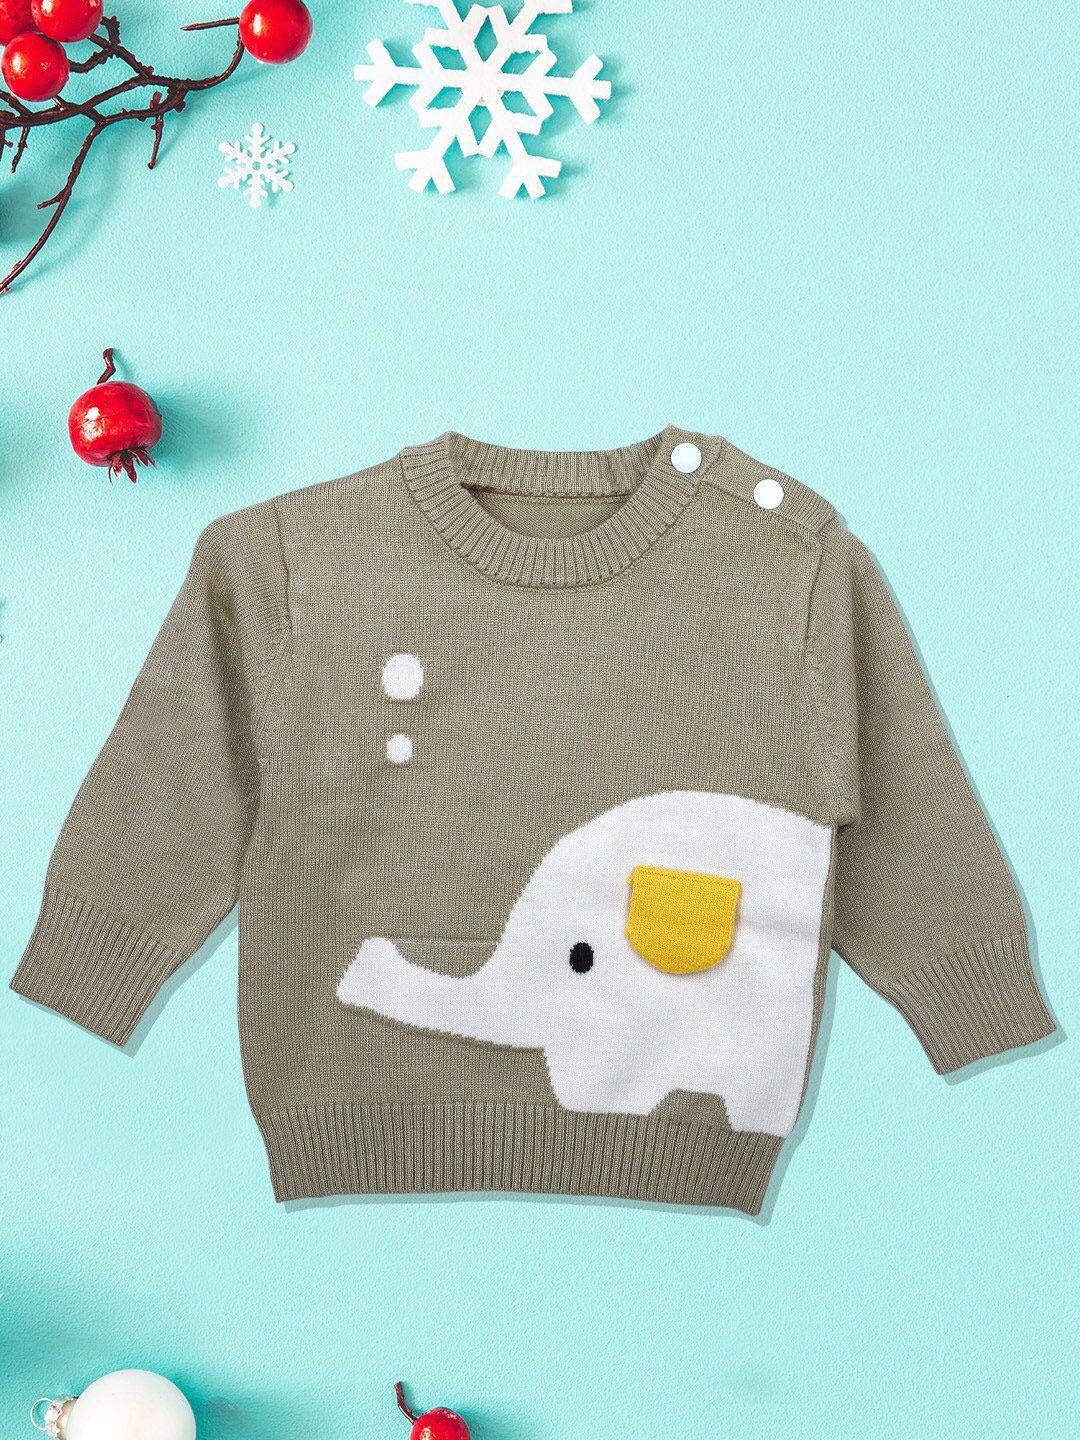 baby-moo-unisex-kids-olive-green-&-white-animal-printed-cotton-pullover